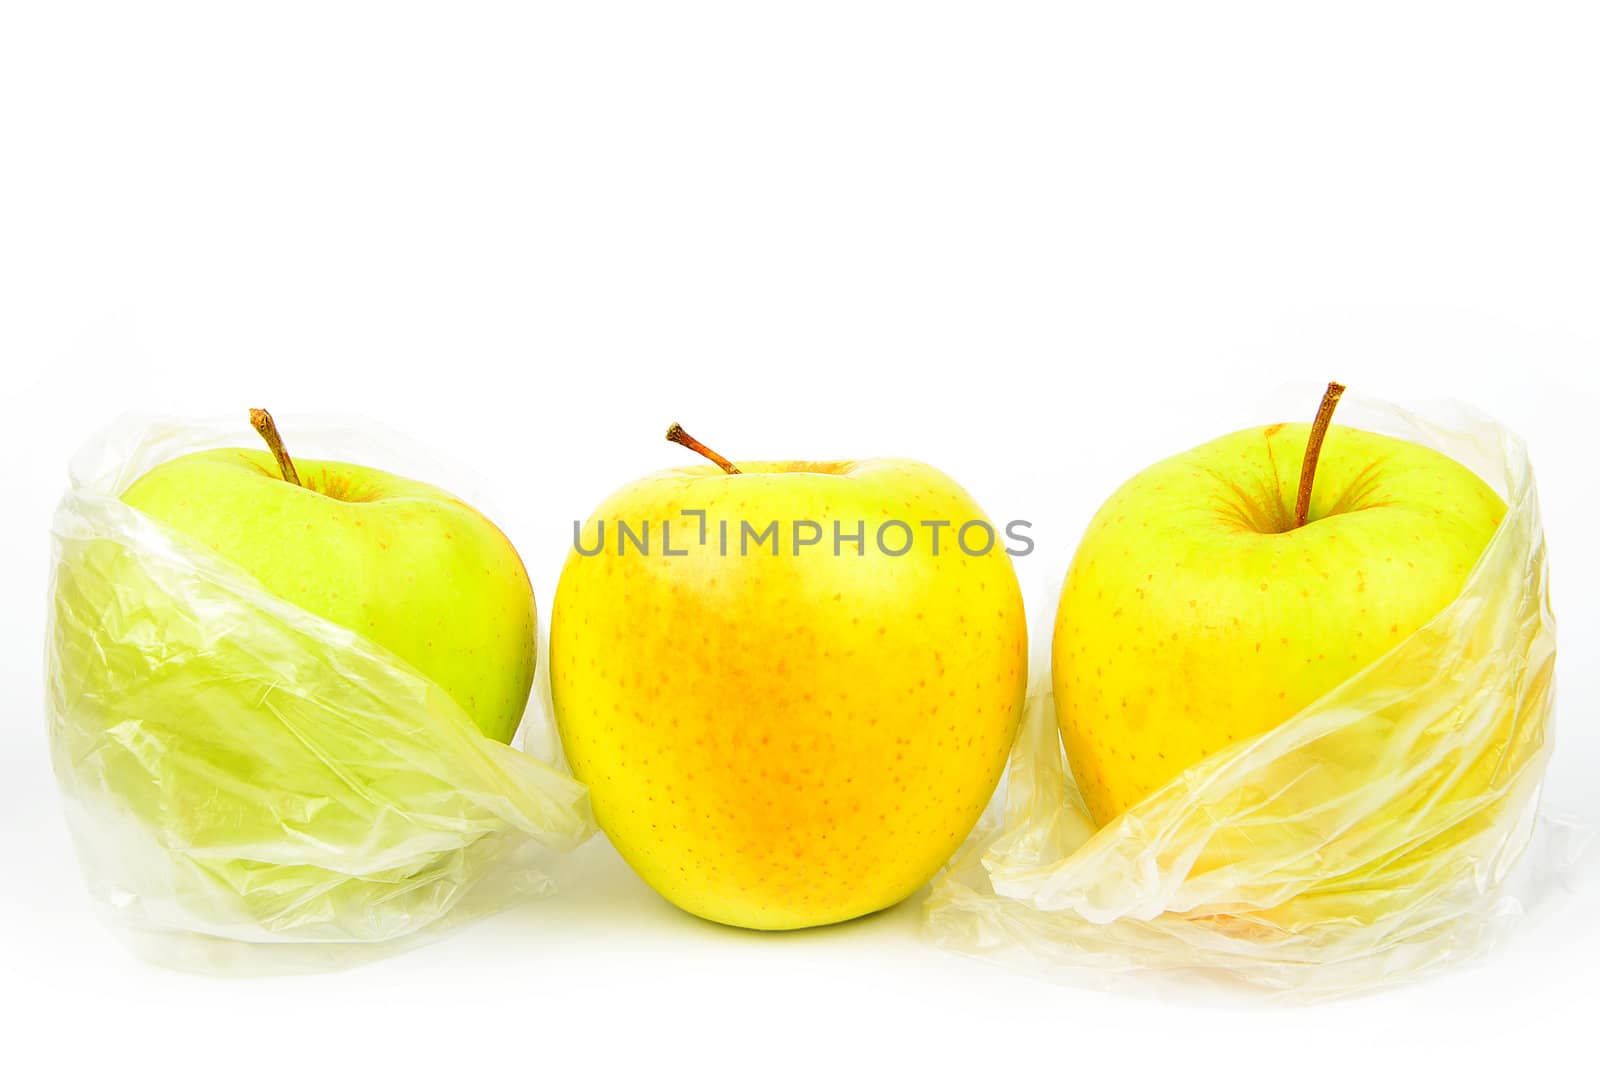 Group of three unpeeled apples on a white background by velislava